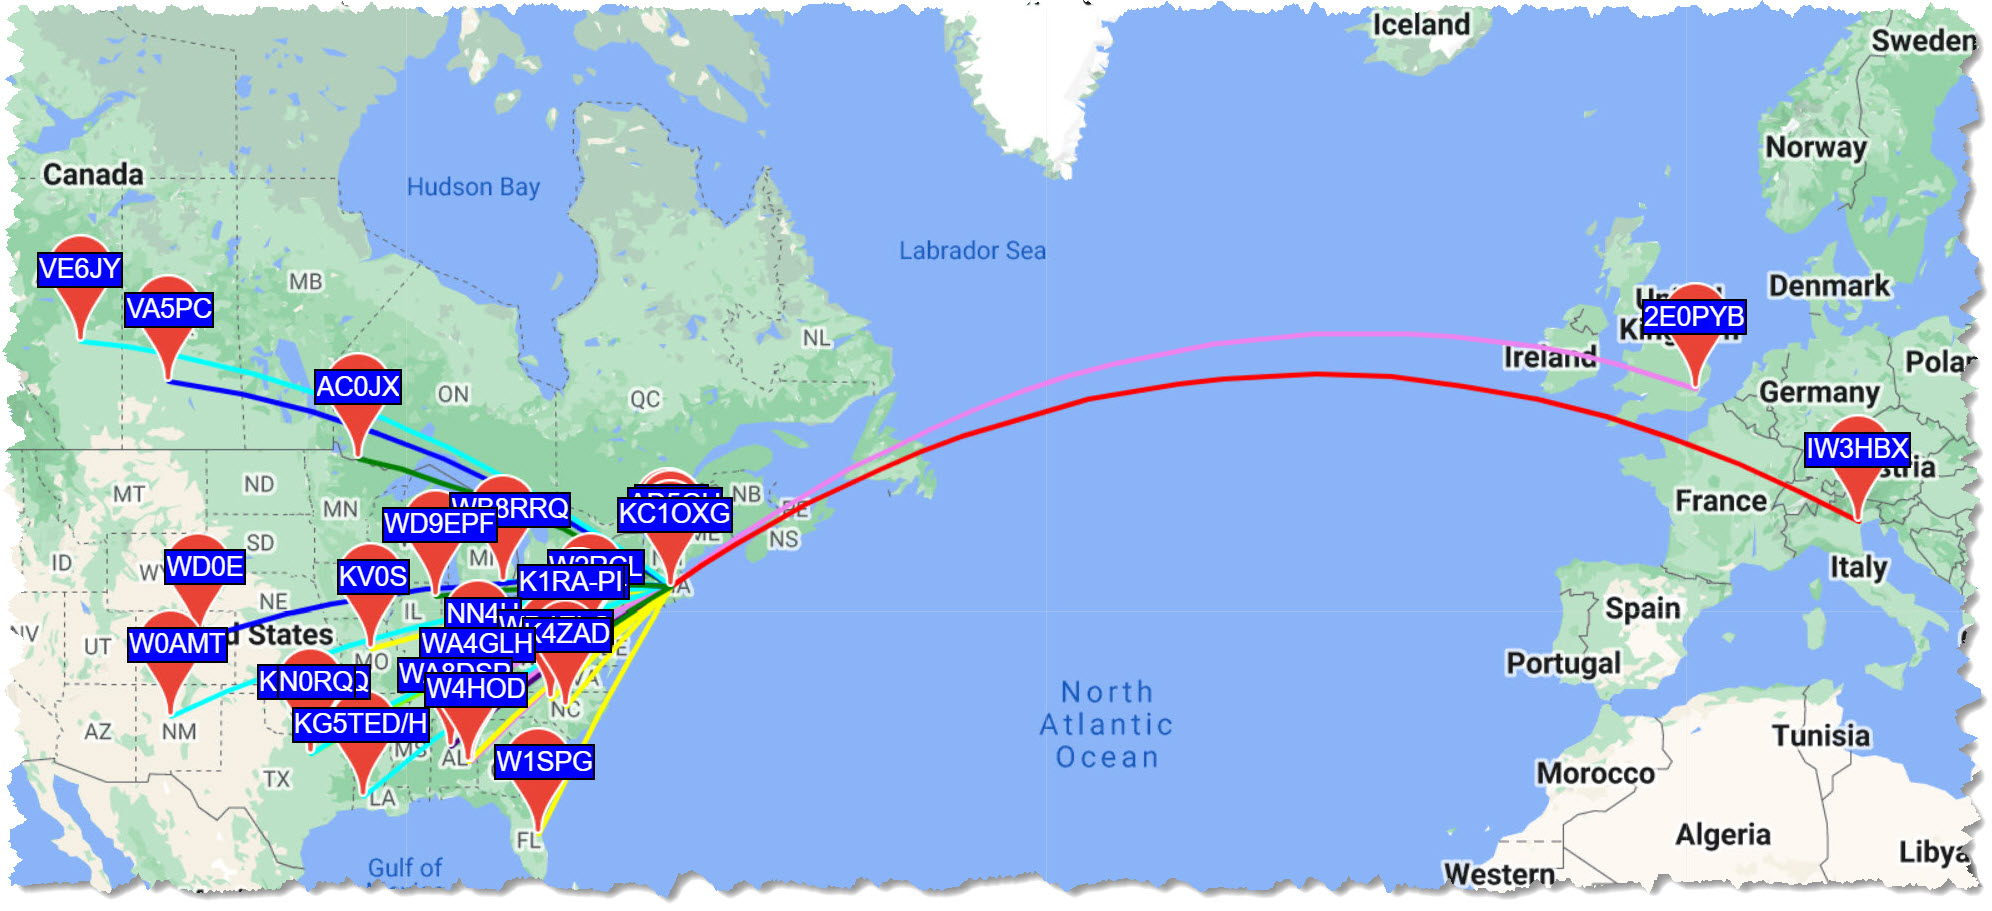 Map of WSPR Image